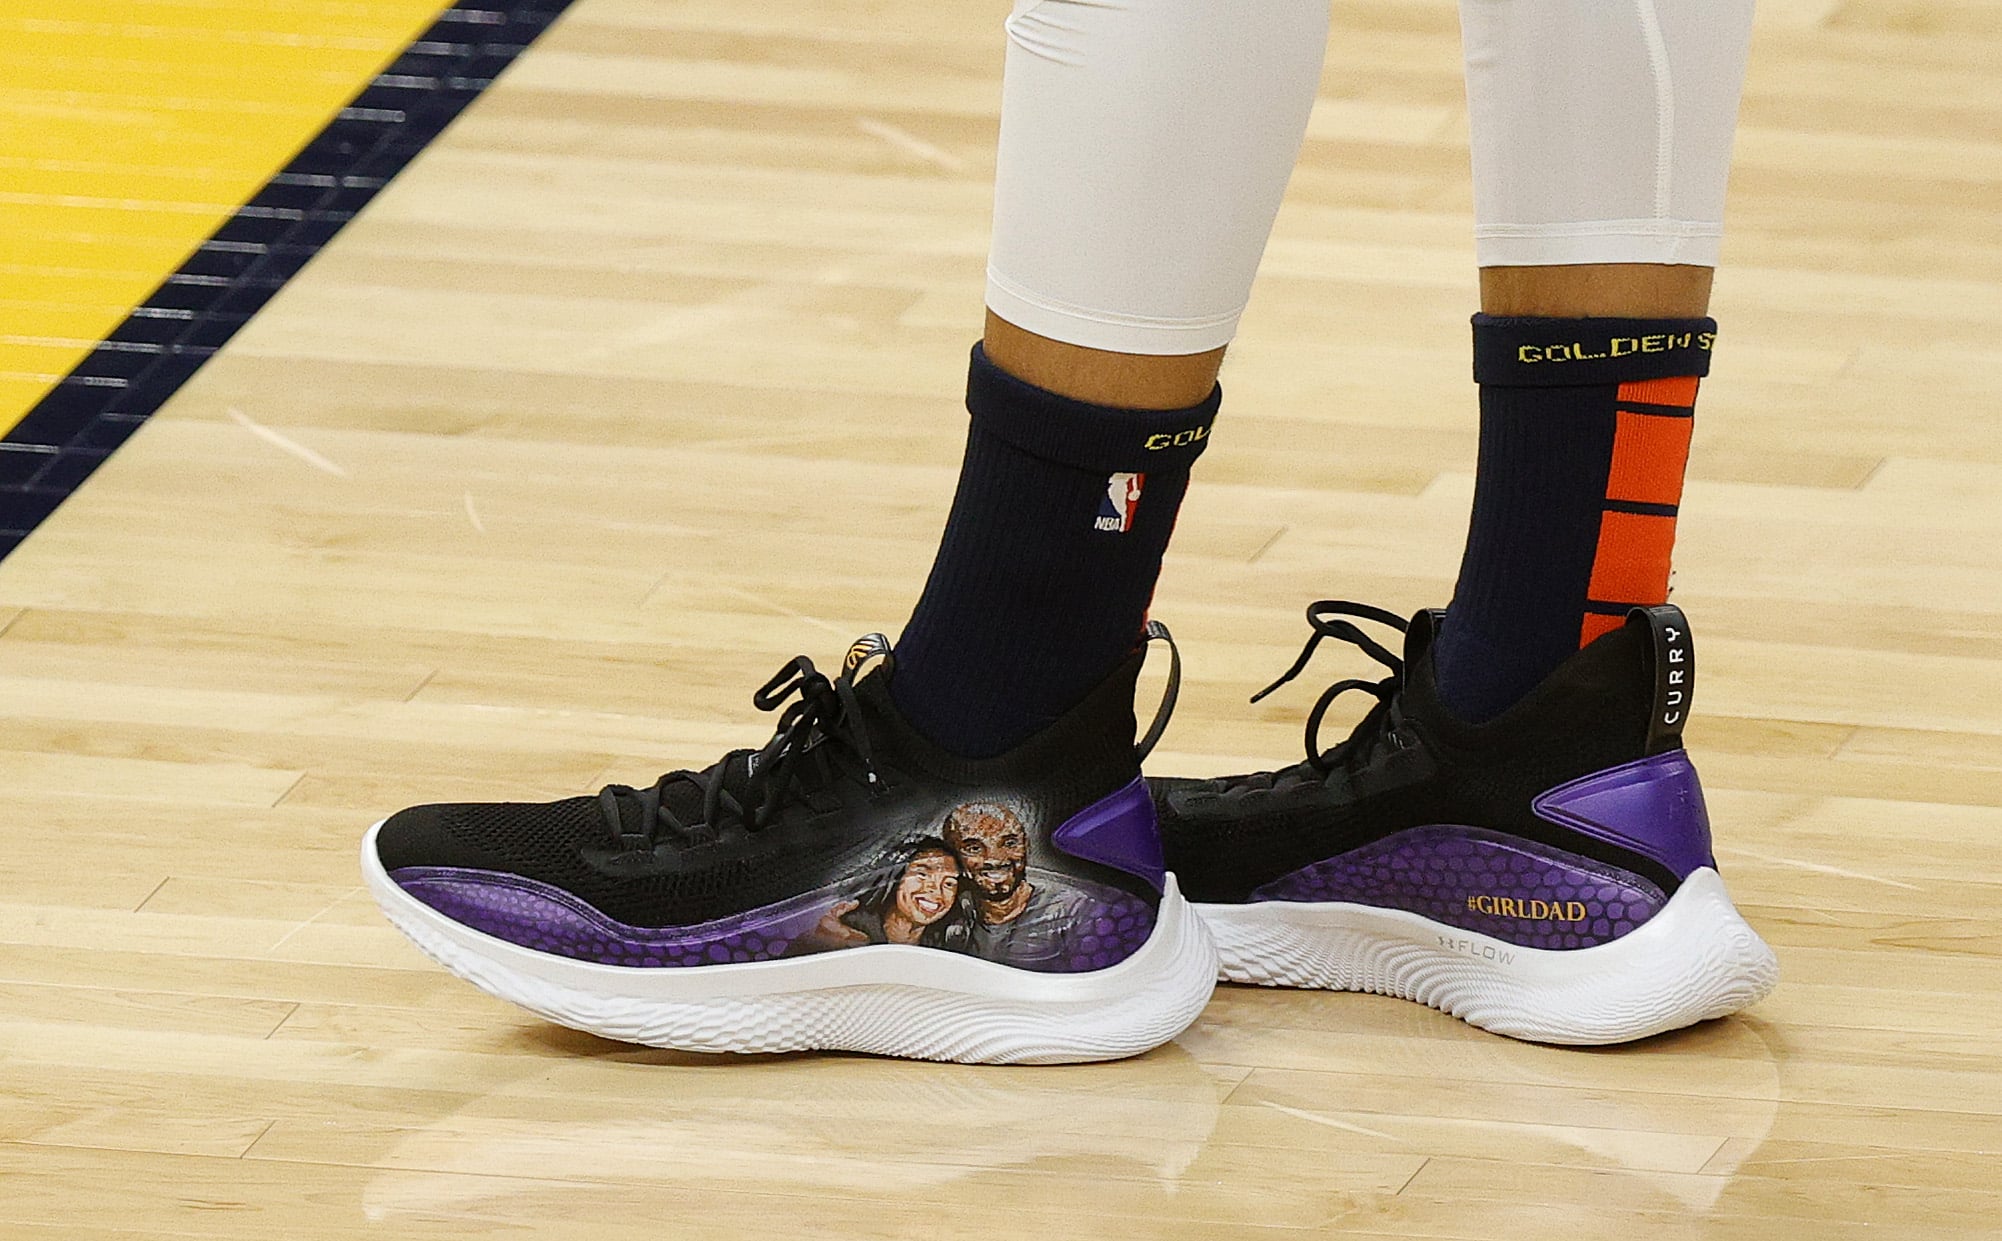 Steph Curry Wore Girl Dad Sneakers to Honour Kobe Bryant